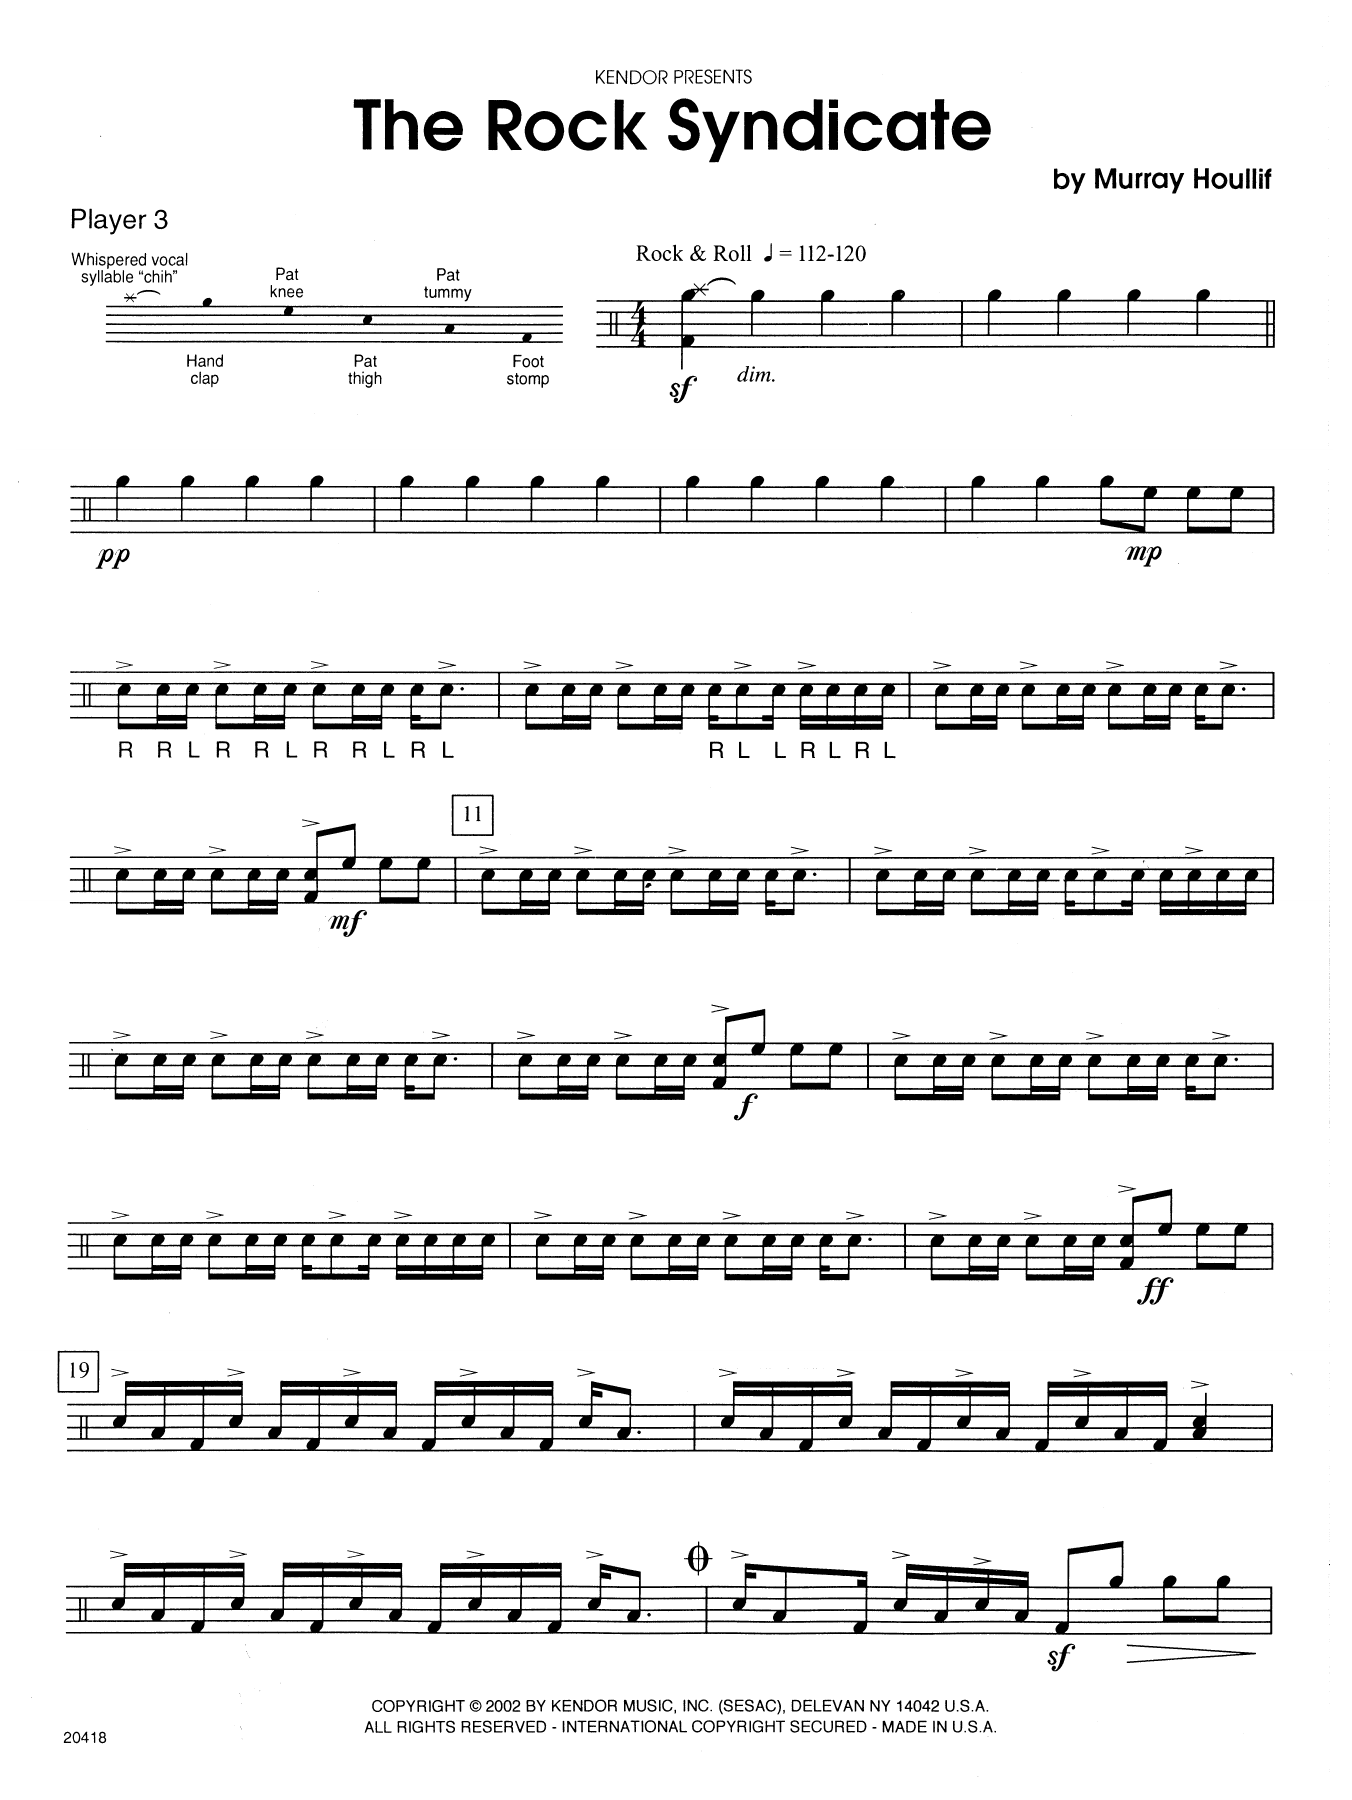 Download Murray Houllif The Rock Syndicate - Percussion 3 Sheet Music